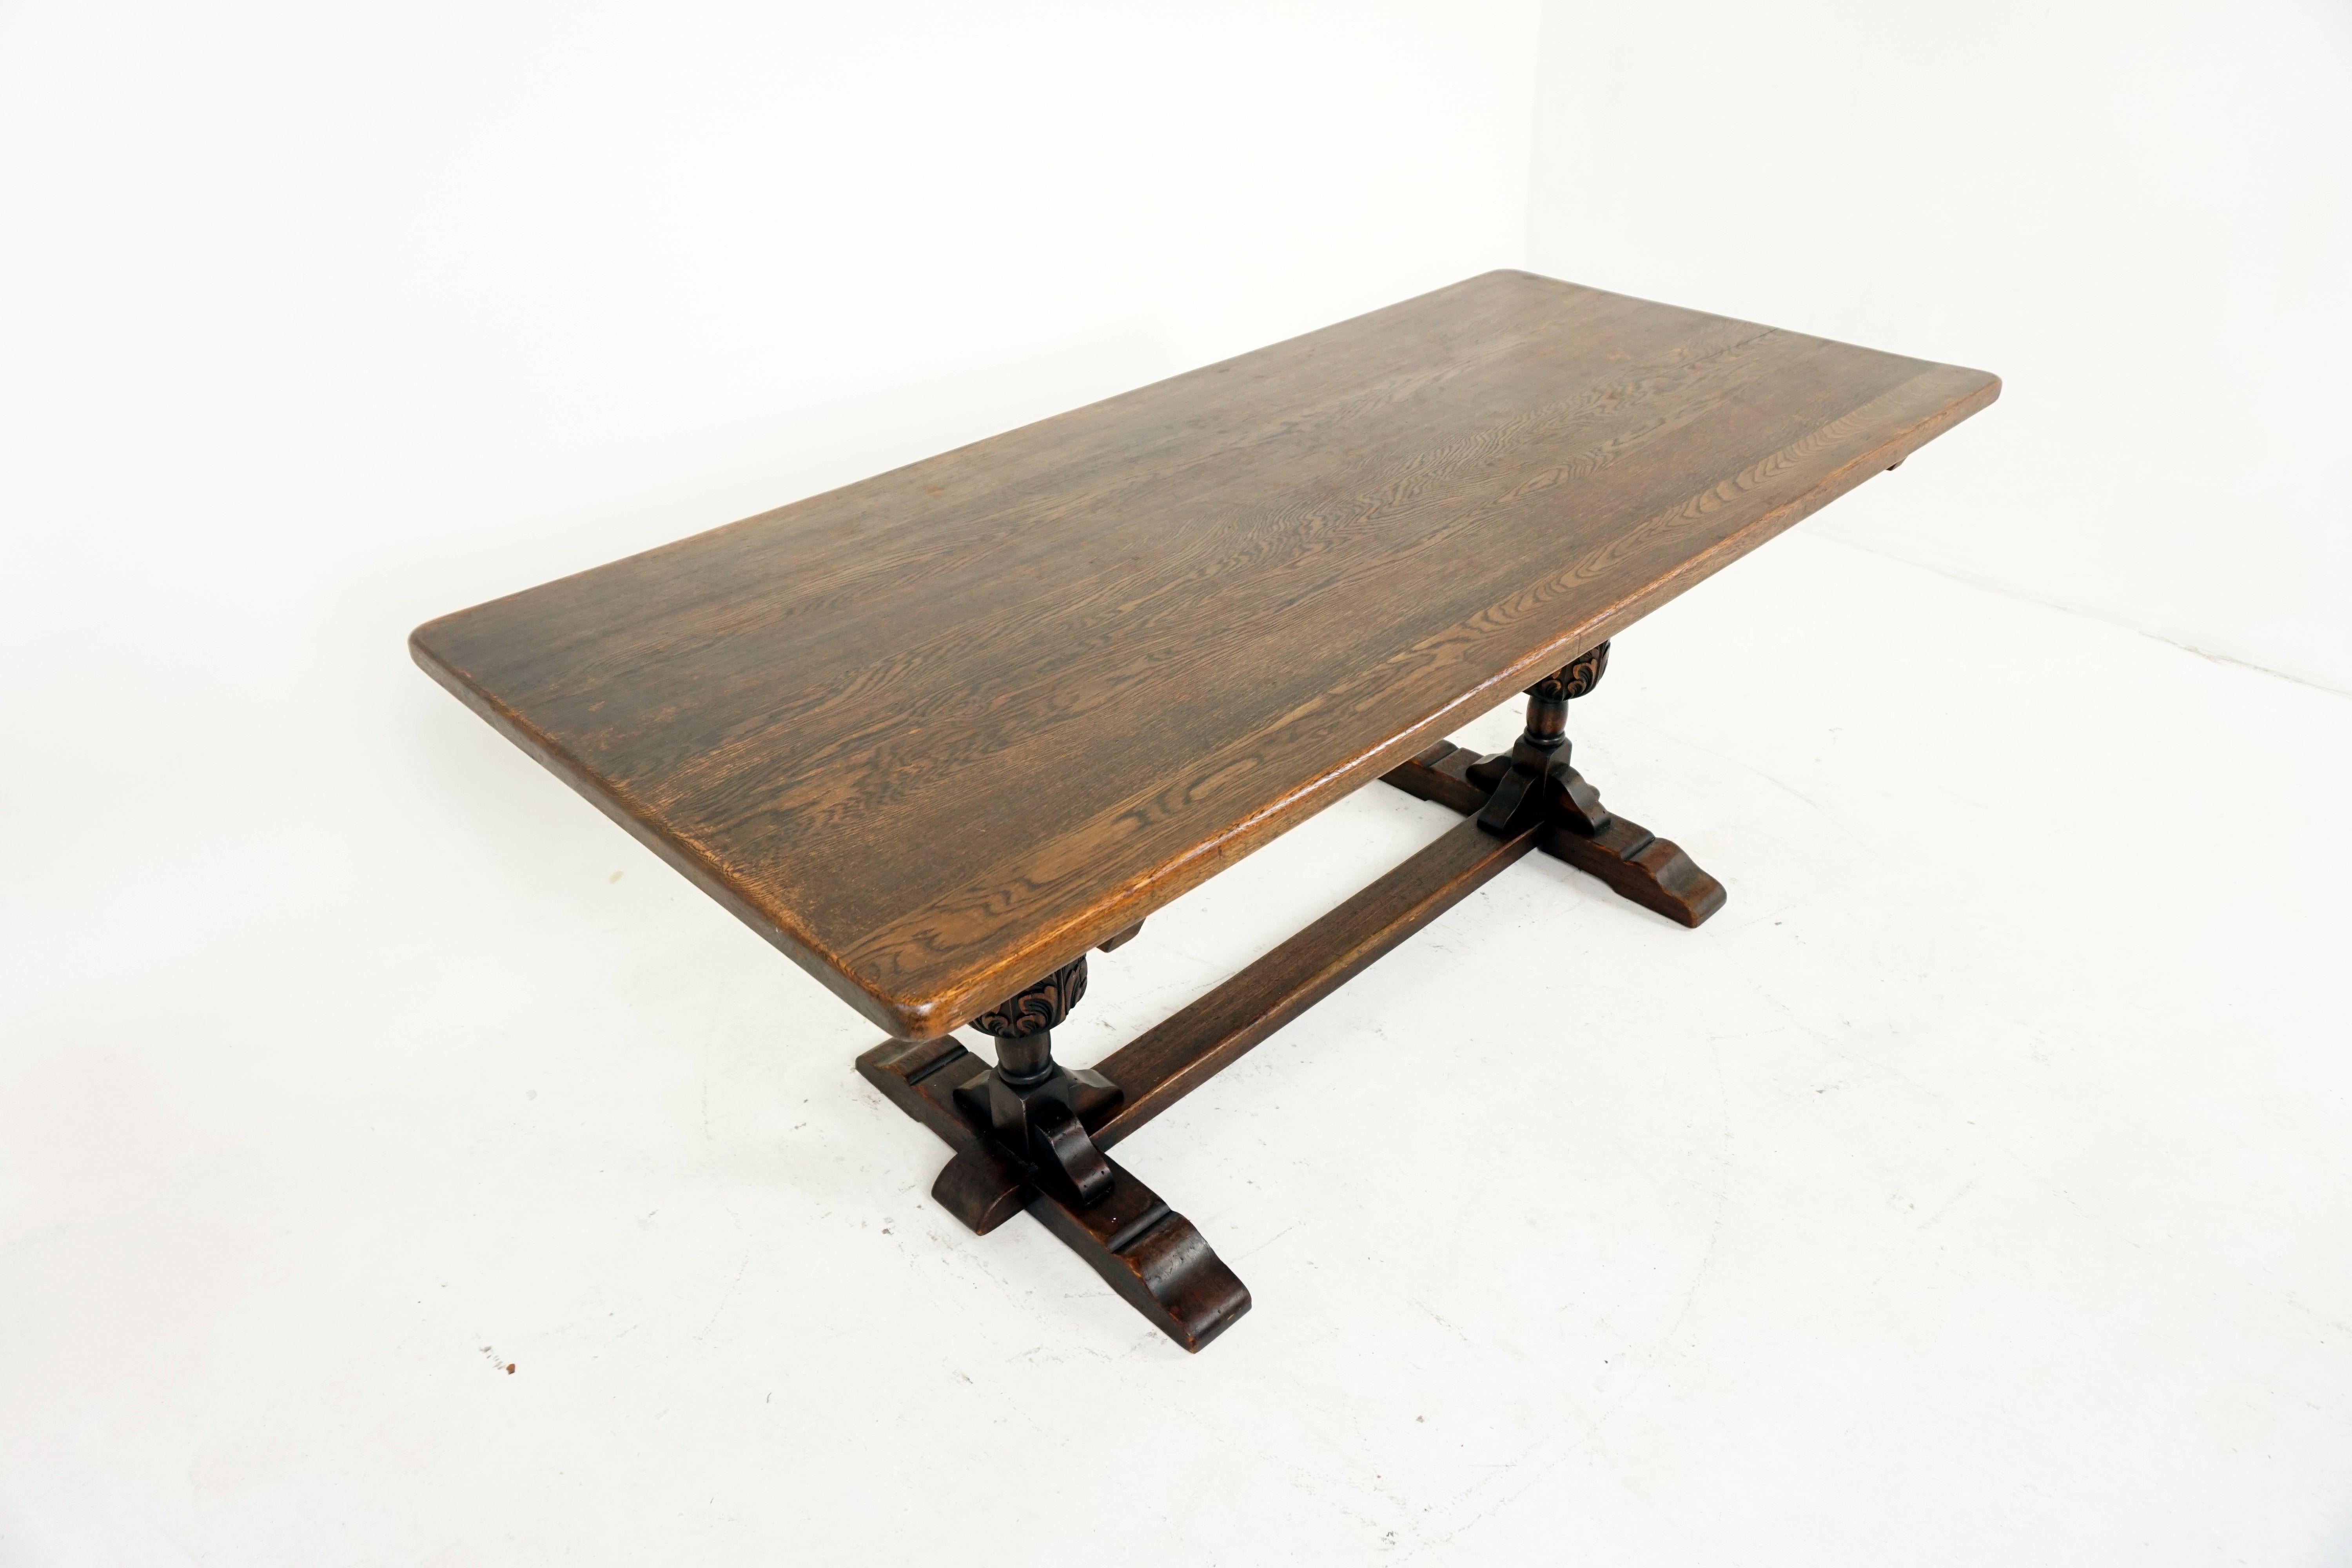 Antique oak table, refectory farmhouse dining table or kitchen table, antique furniture, Scotland, 1930

Scotland, 1930
Solid oak construction
Original finish
Solid rectangular top
All supported by two carved baluster supports
With platform